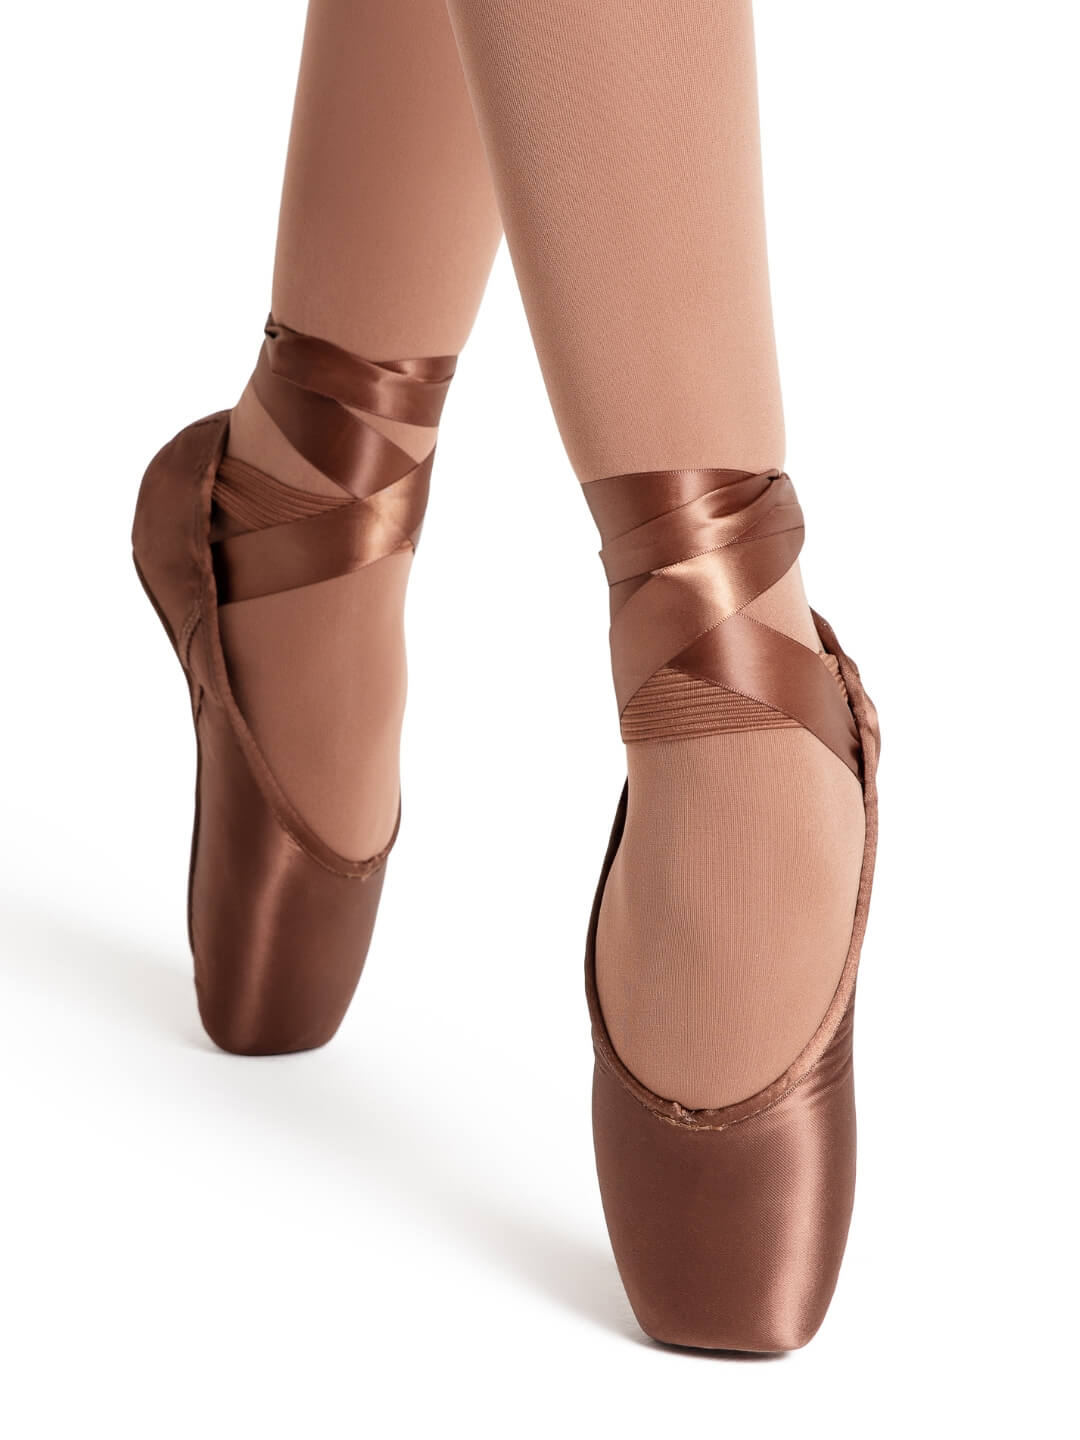 Ava Pointe Shoe with #2.5 Shank and Broad Toe Box